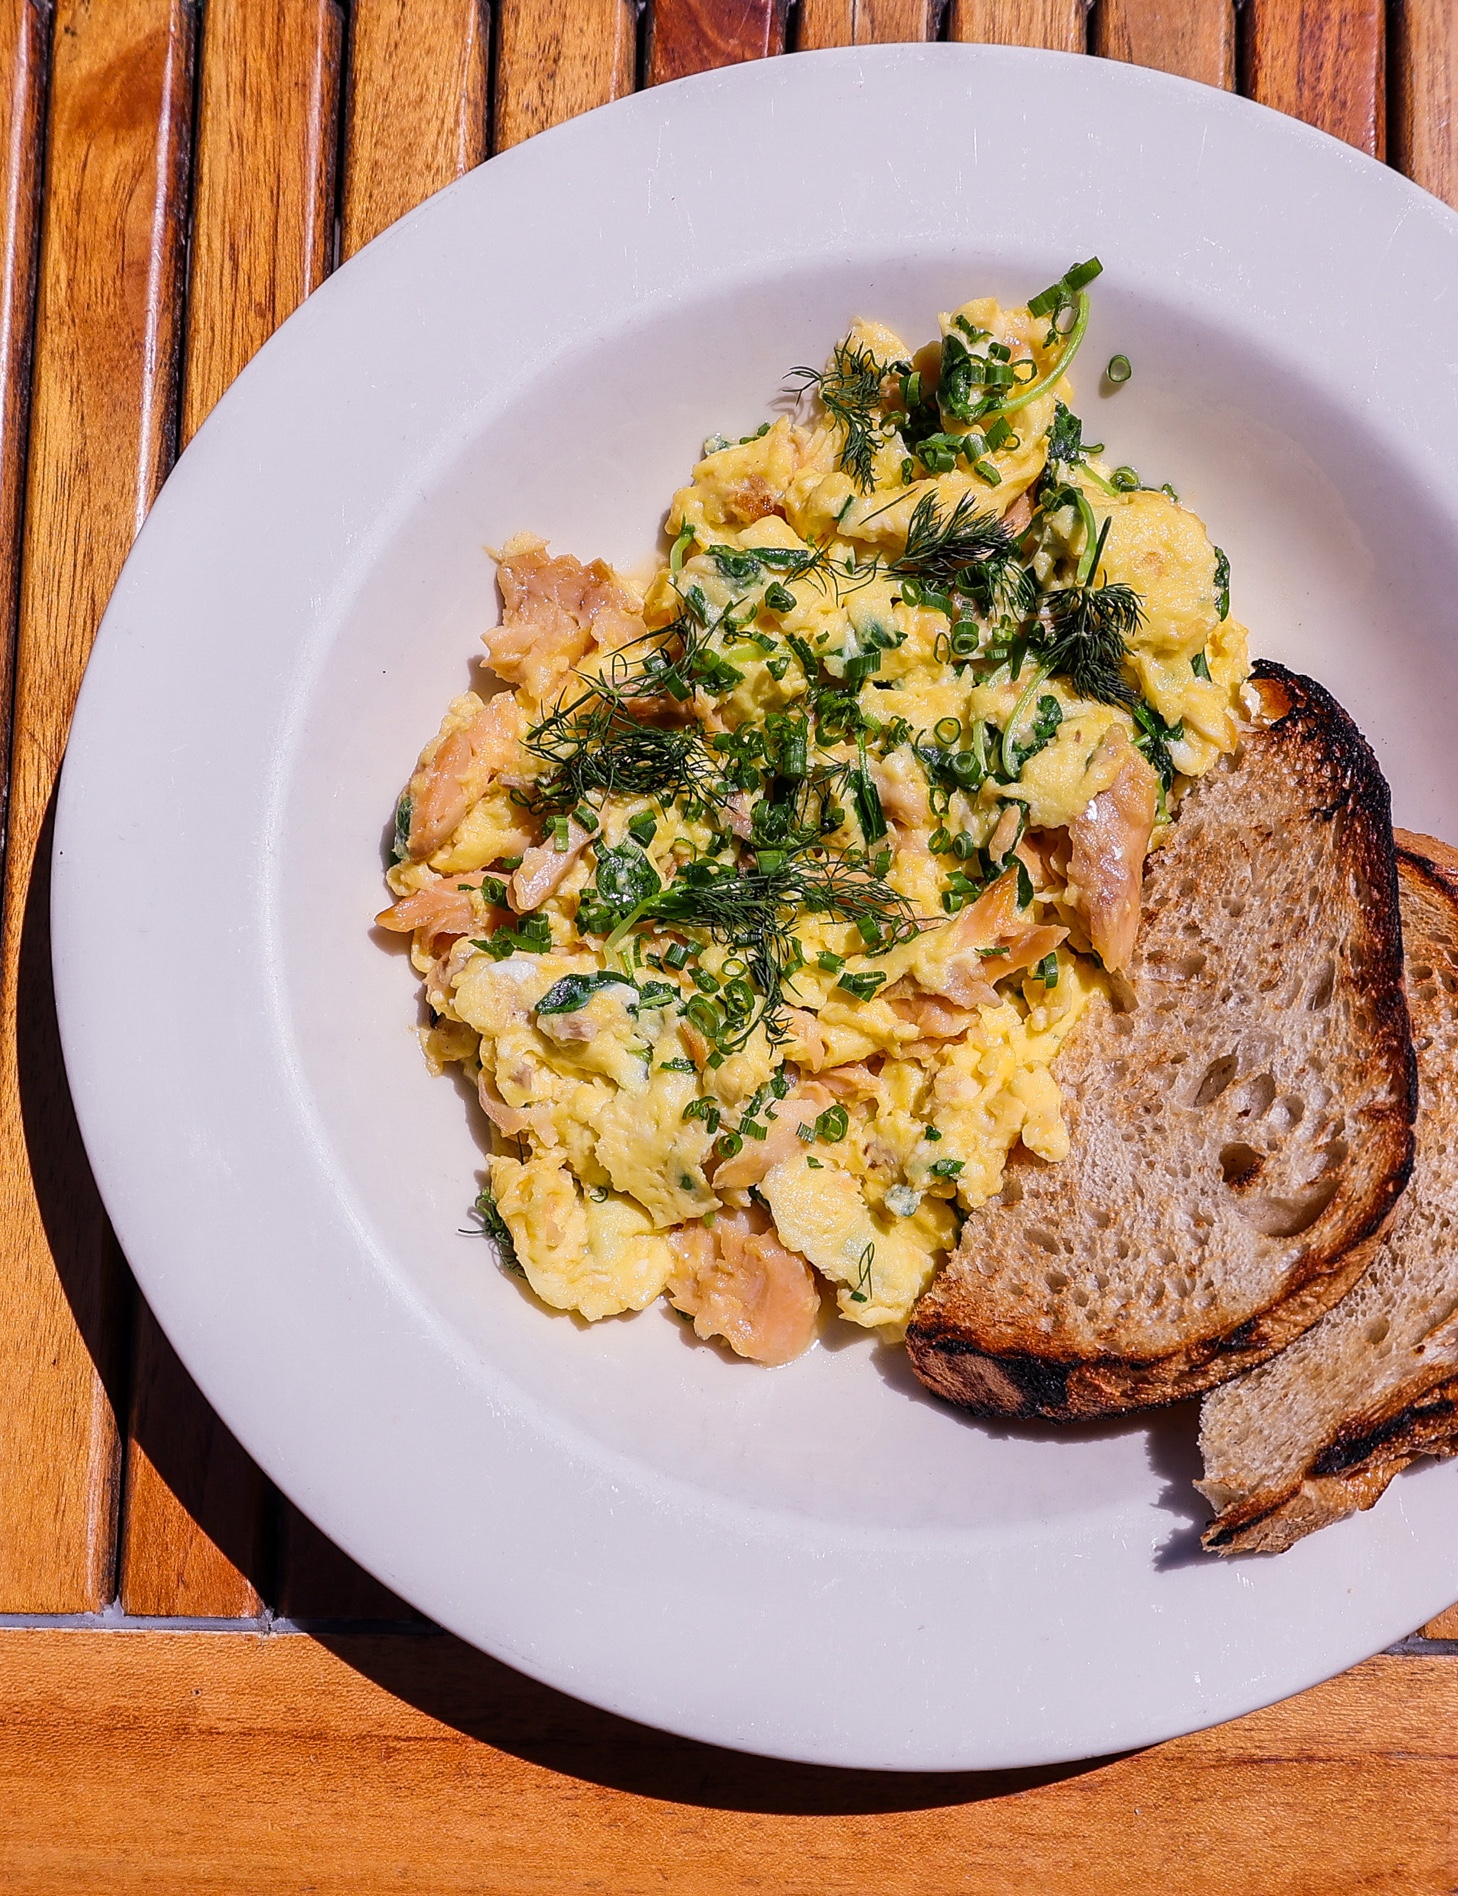 A plate full of scrambled eggs, smoked trout, and toast.